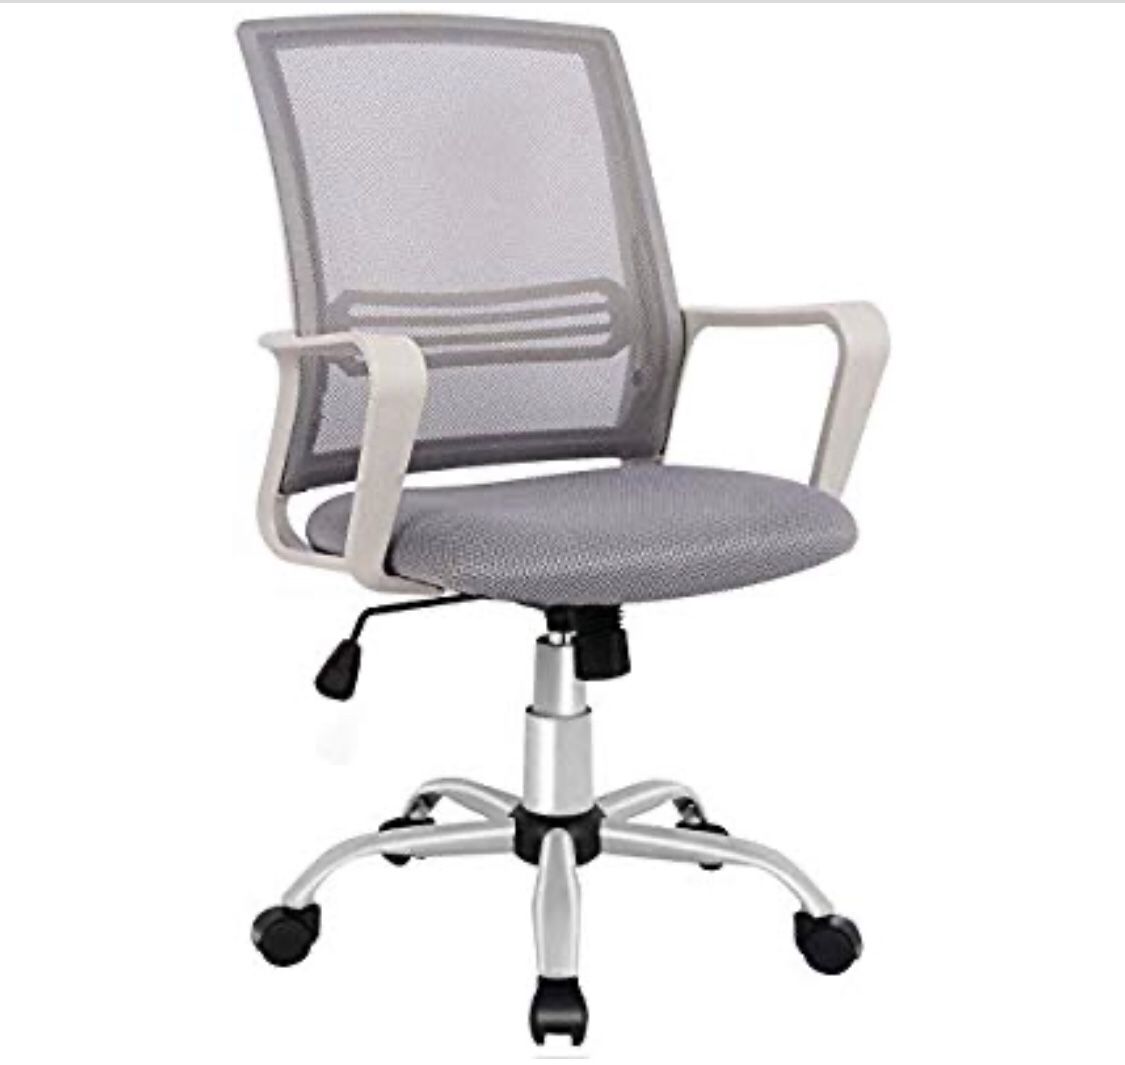 SMUGDESK Office Chair, Mid Back Mesh Office Computer Swivel Desk Task Chair, Ergonomic Executive Chair with Armrests